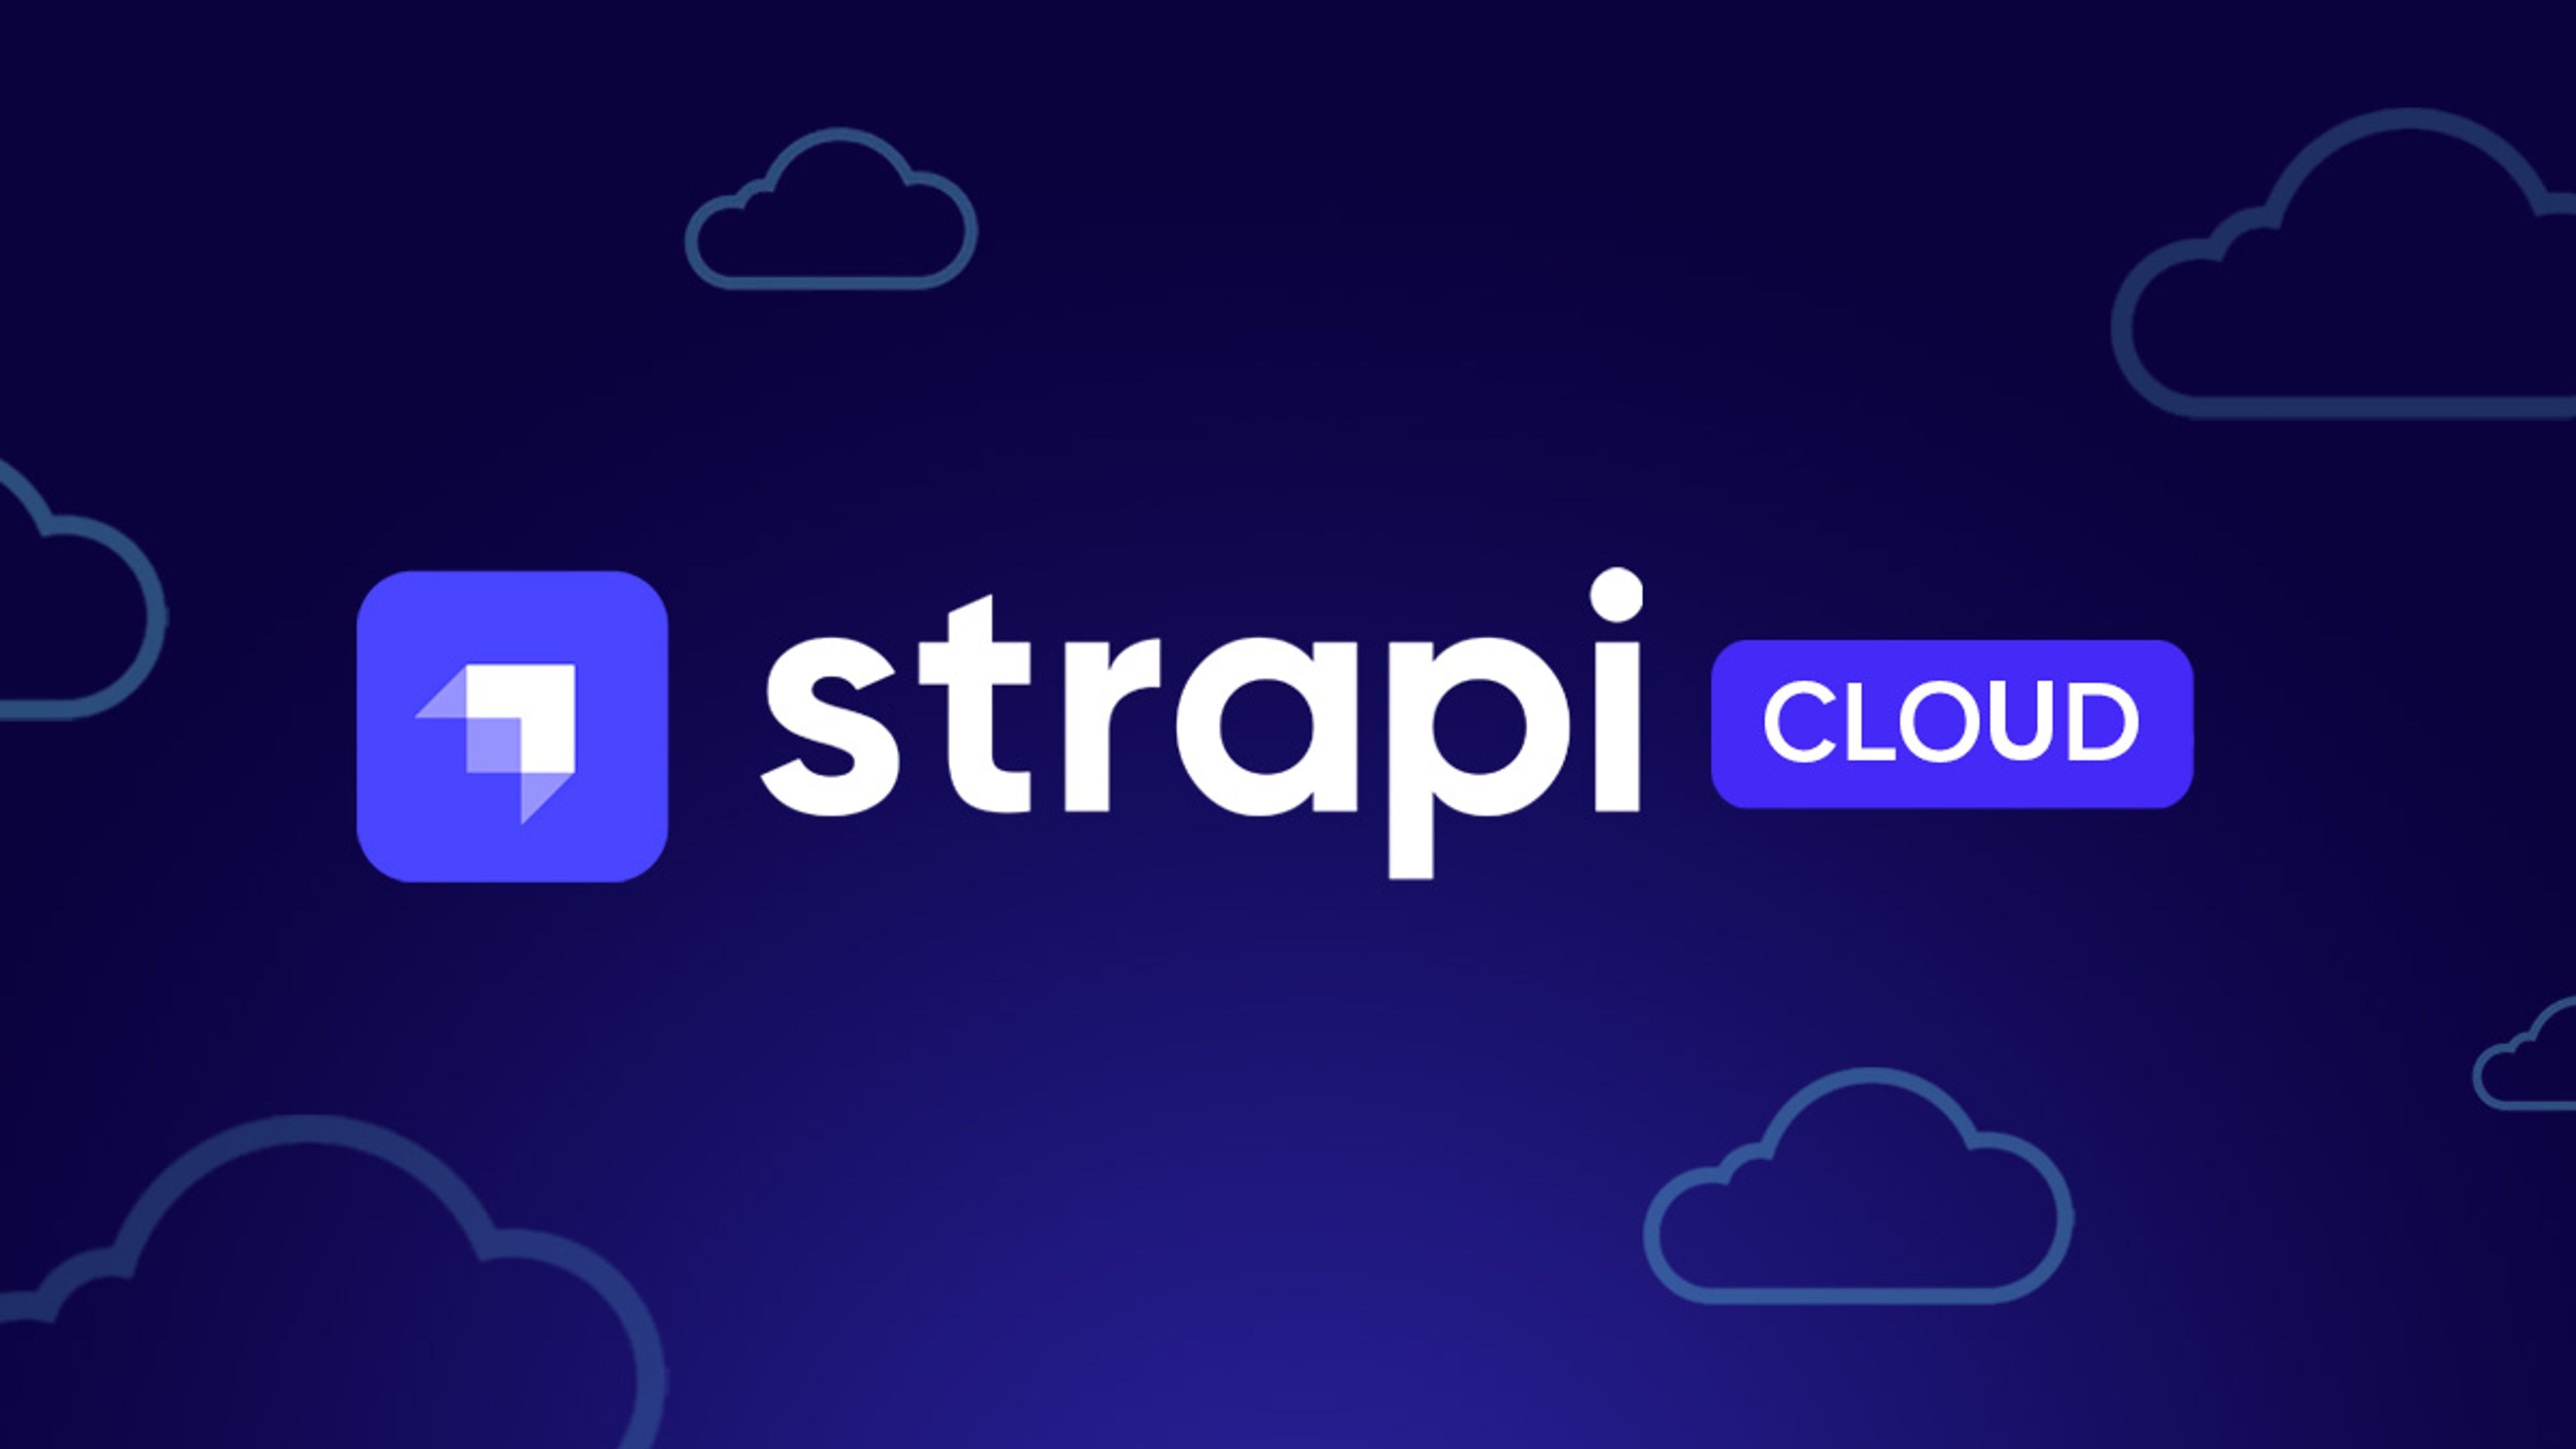 Strapi Cloud logo against a dark background with cloud graphics. 